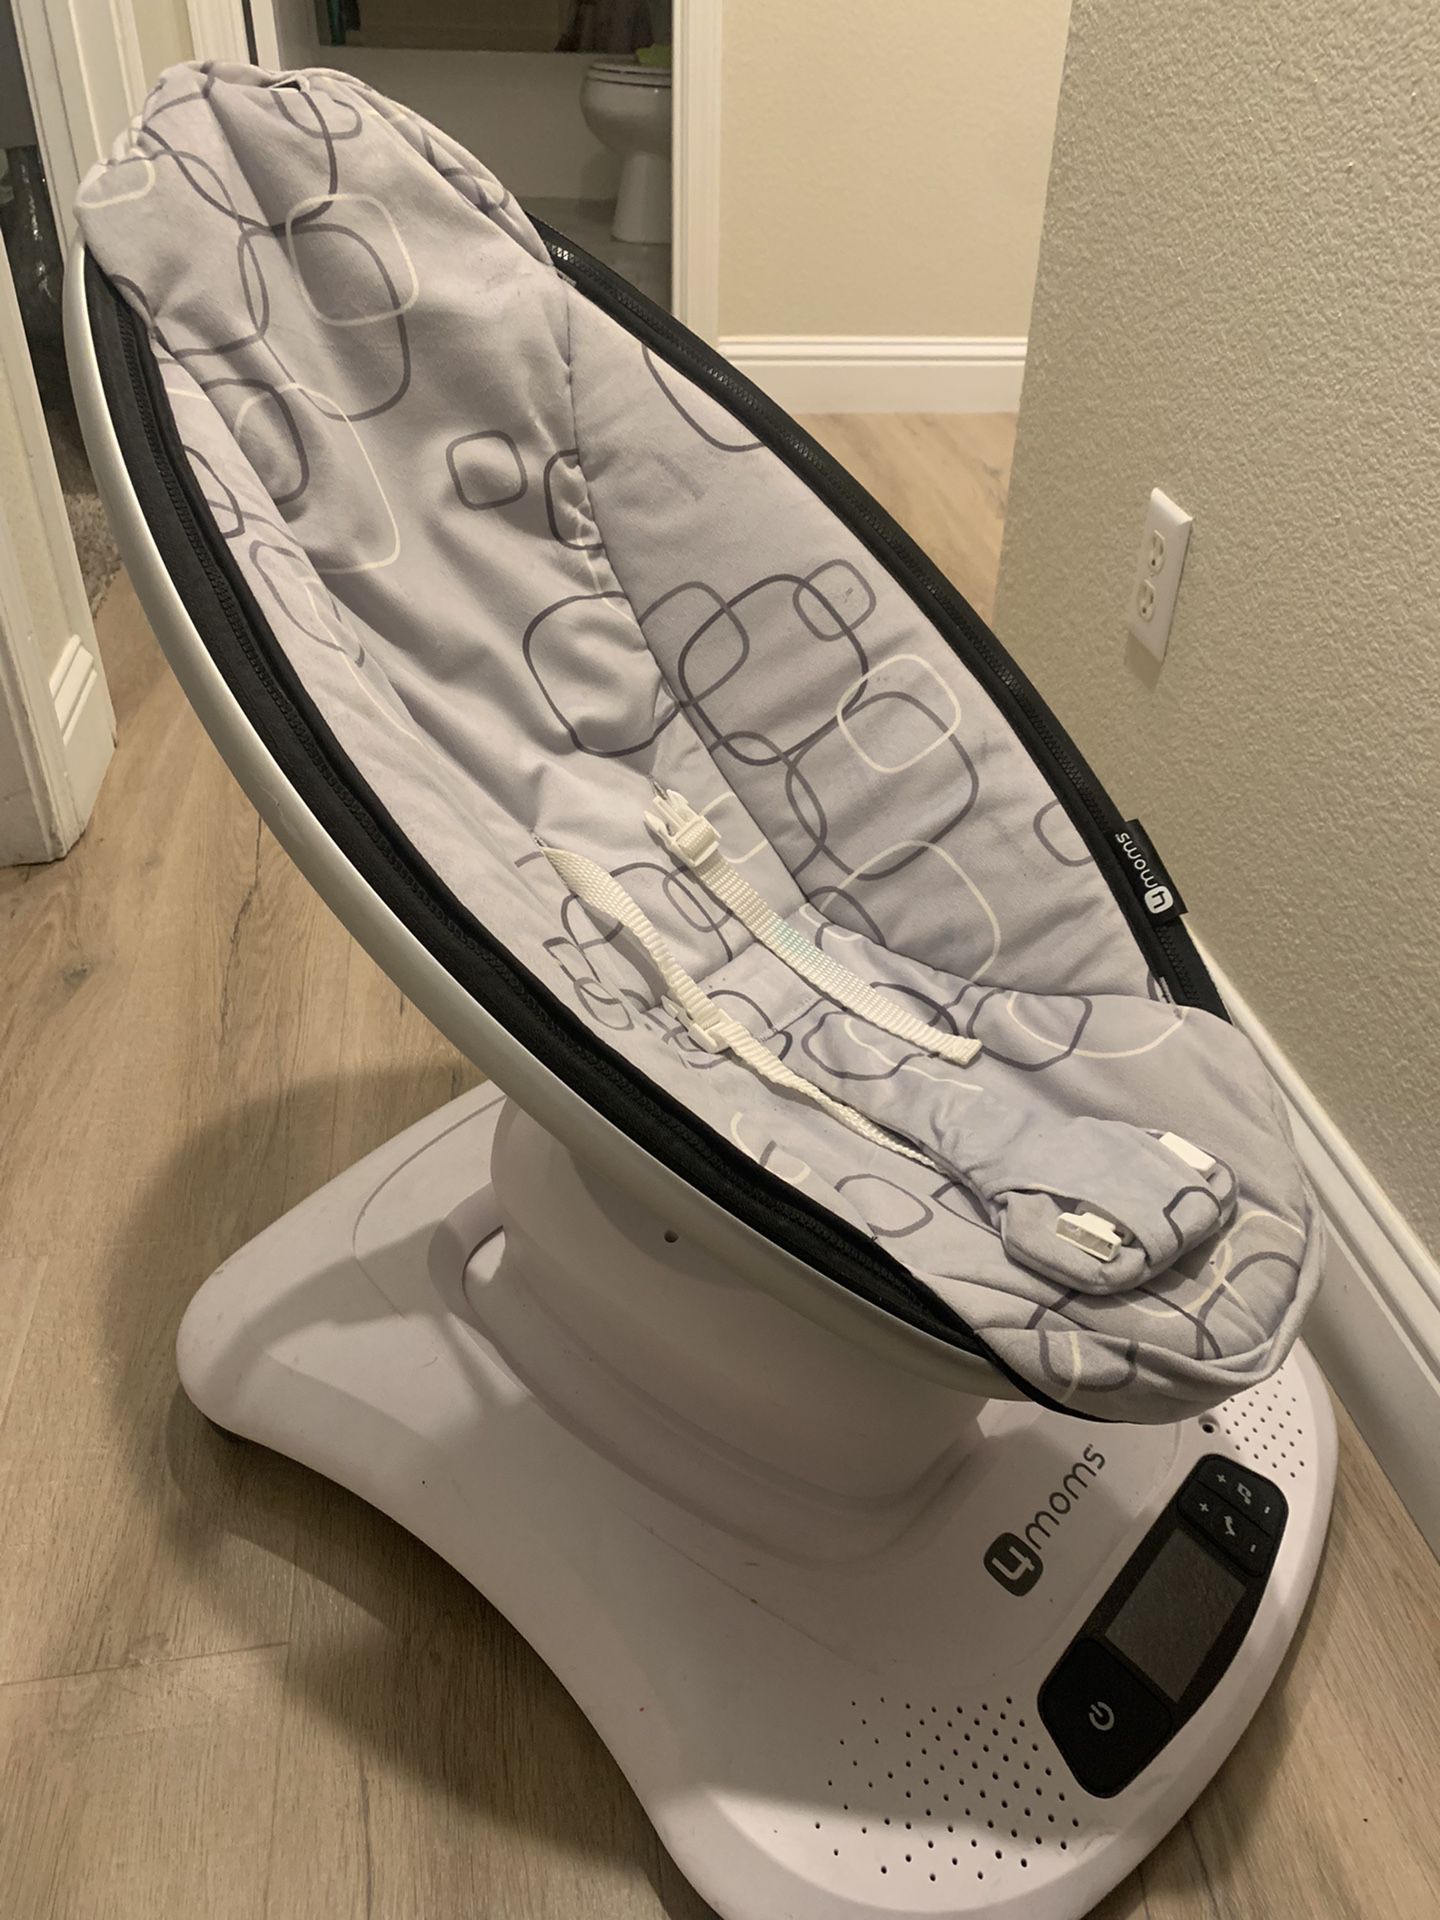 4moms mamaRoo 4 Baby Swing | Bluetooth Baby Rocker with 5 Unique Motions